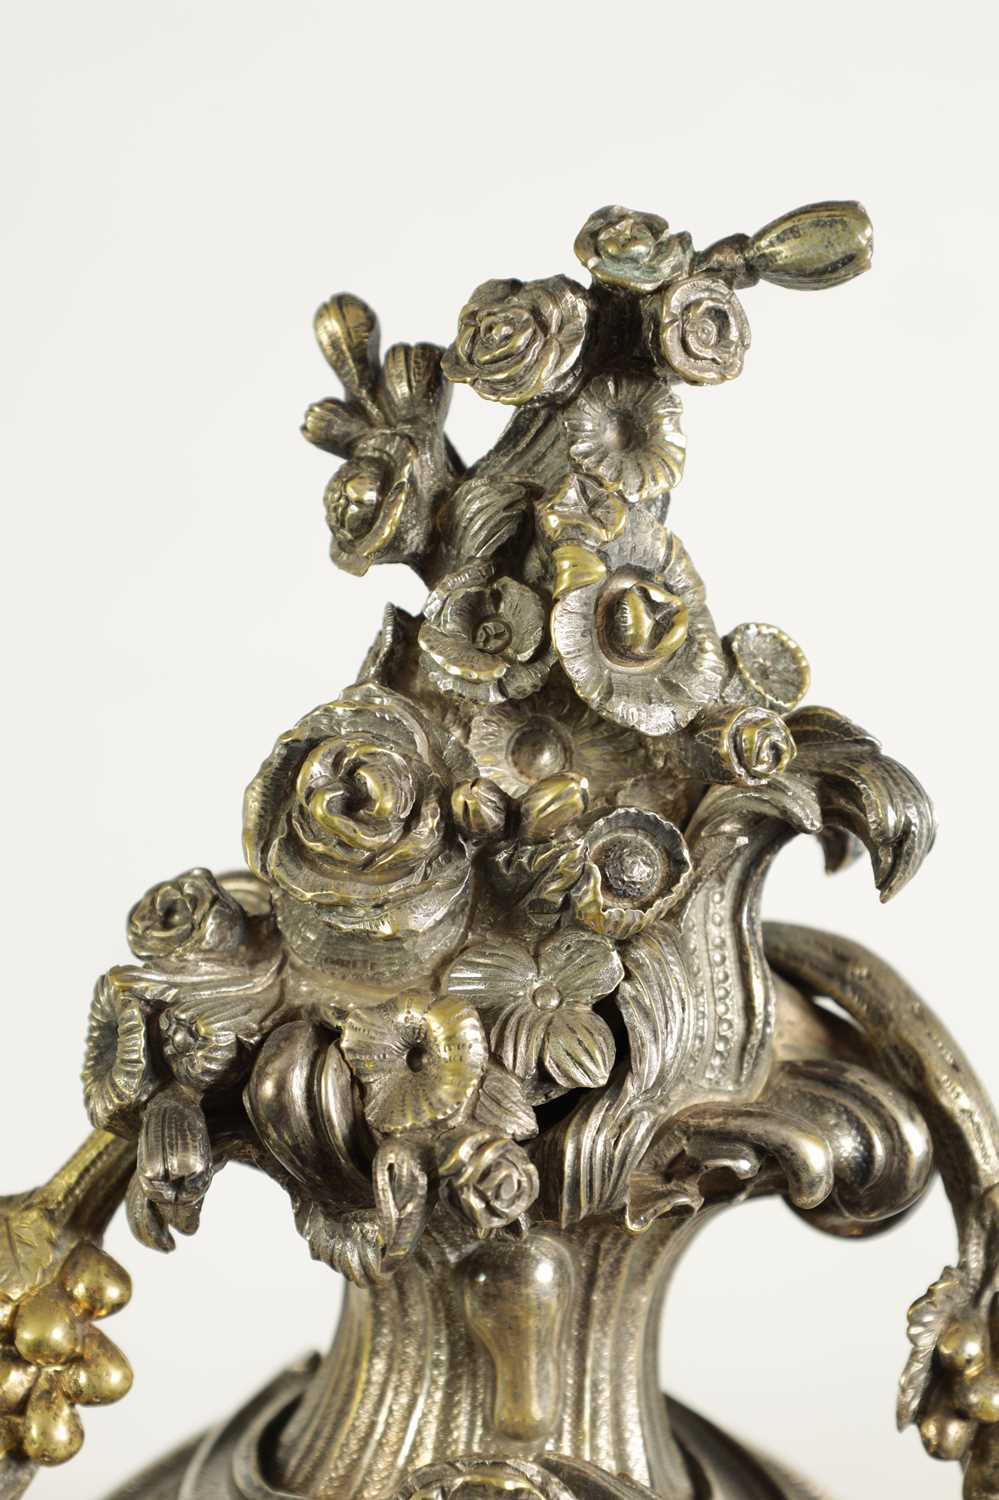 HENRY MARC, A PARIS. A MID 19TH CENTURY FRENCH ROCOCO STYLE SILVERED BRONZE MANTEL CLOCK - Image 3 of 10